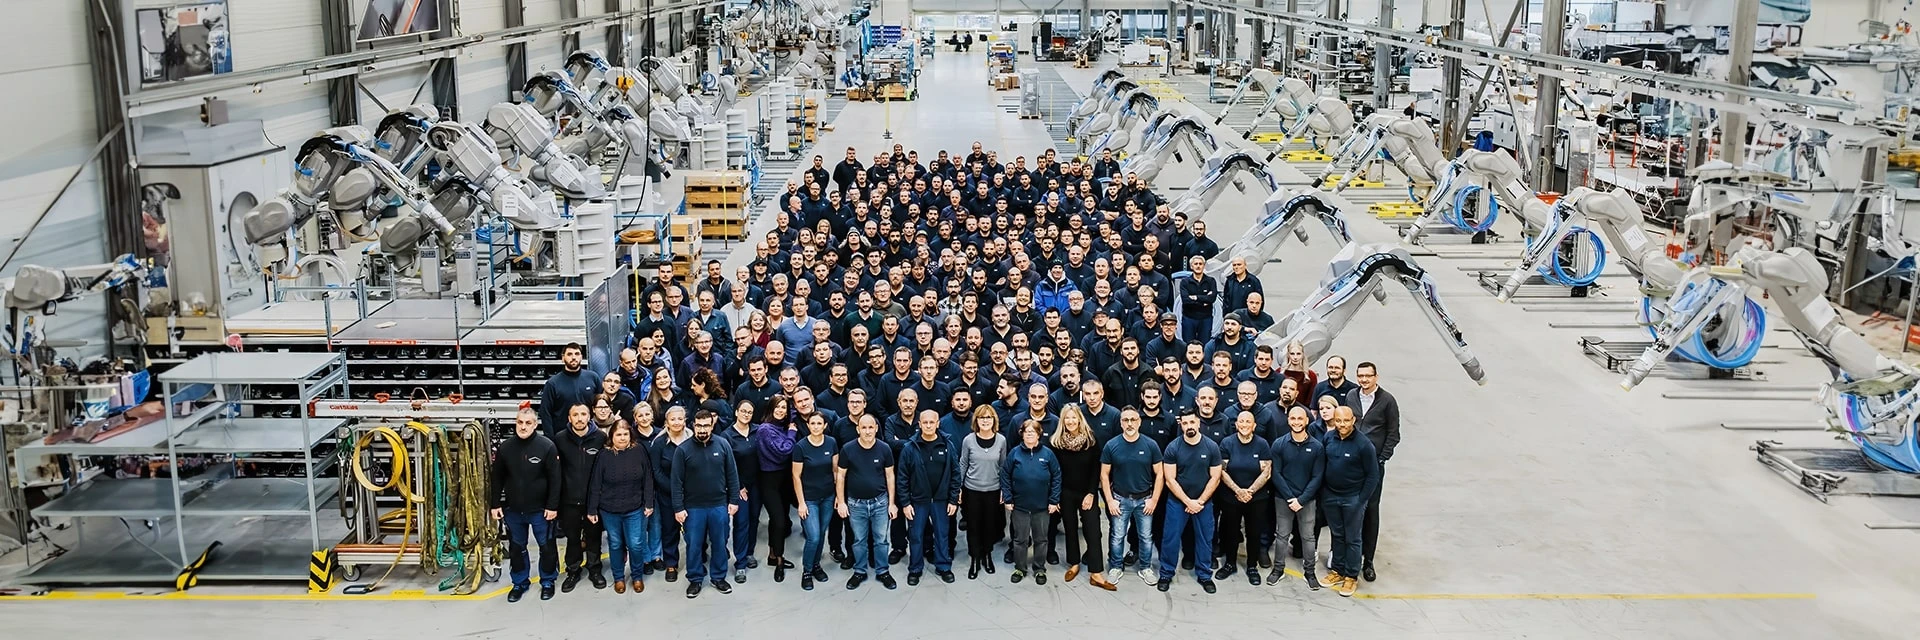 Dürr employees with robots in the background